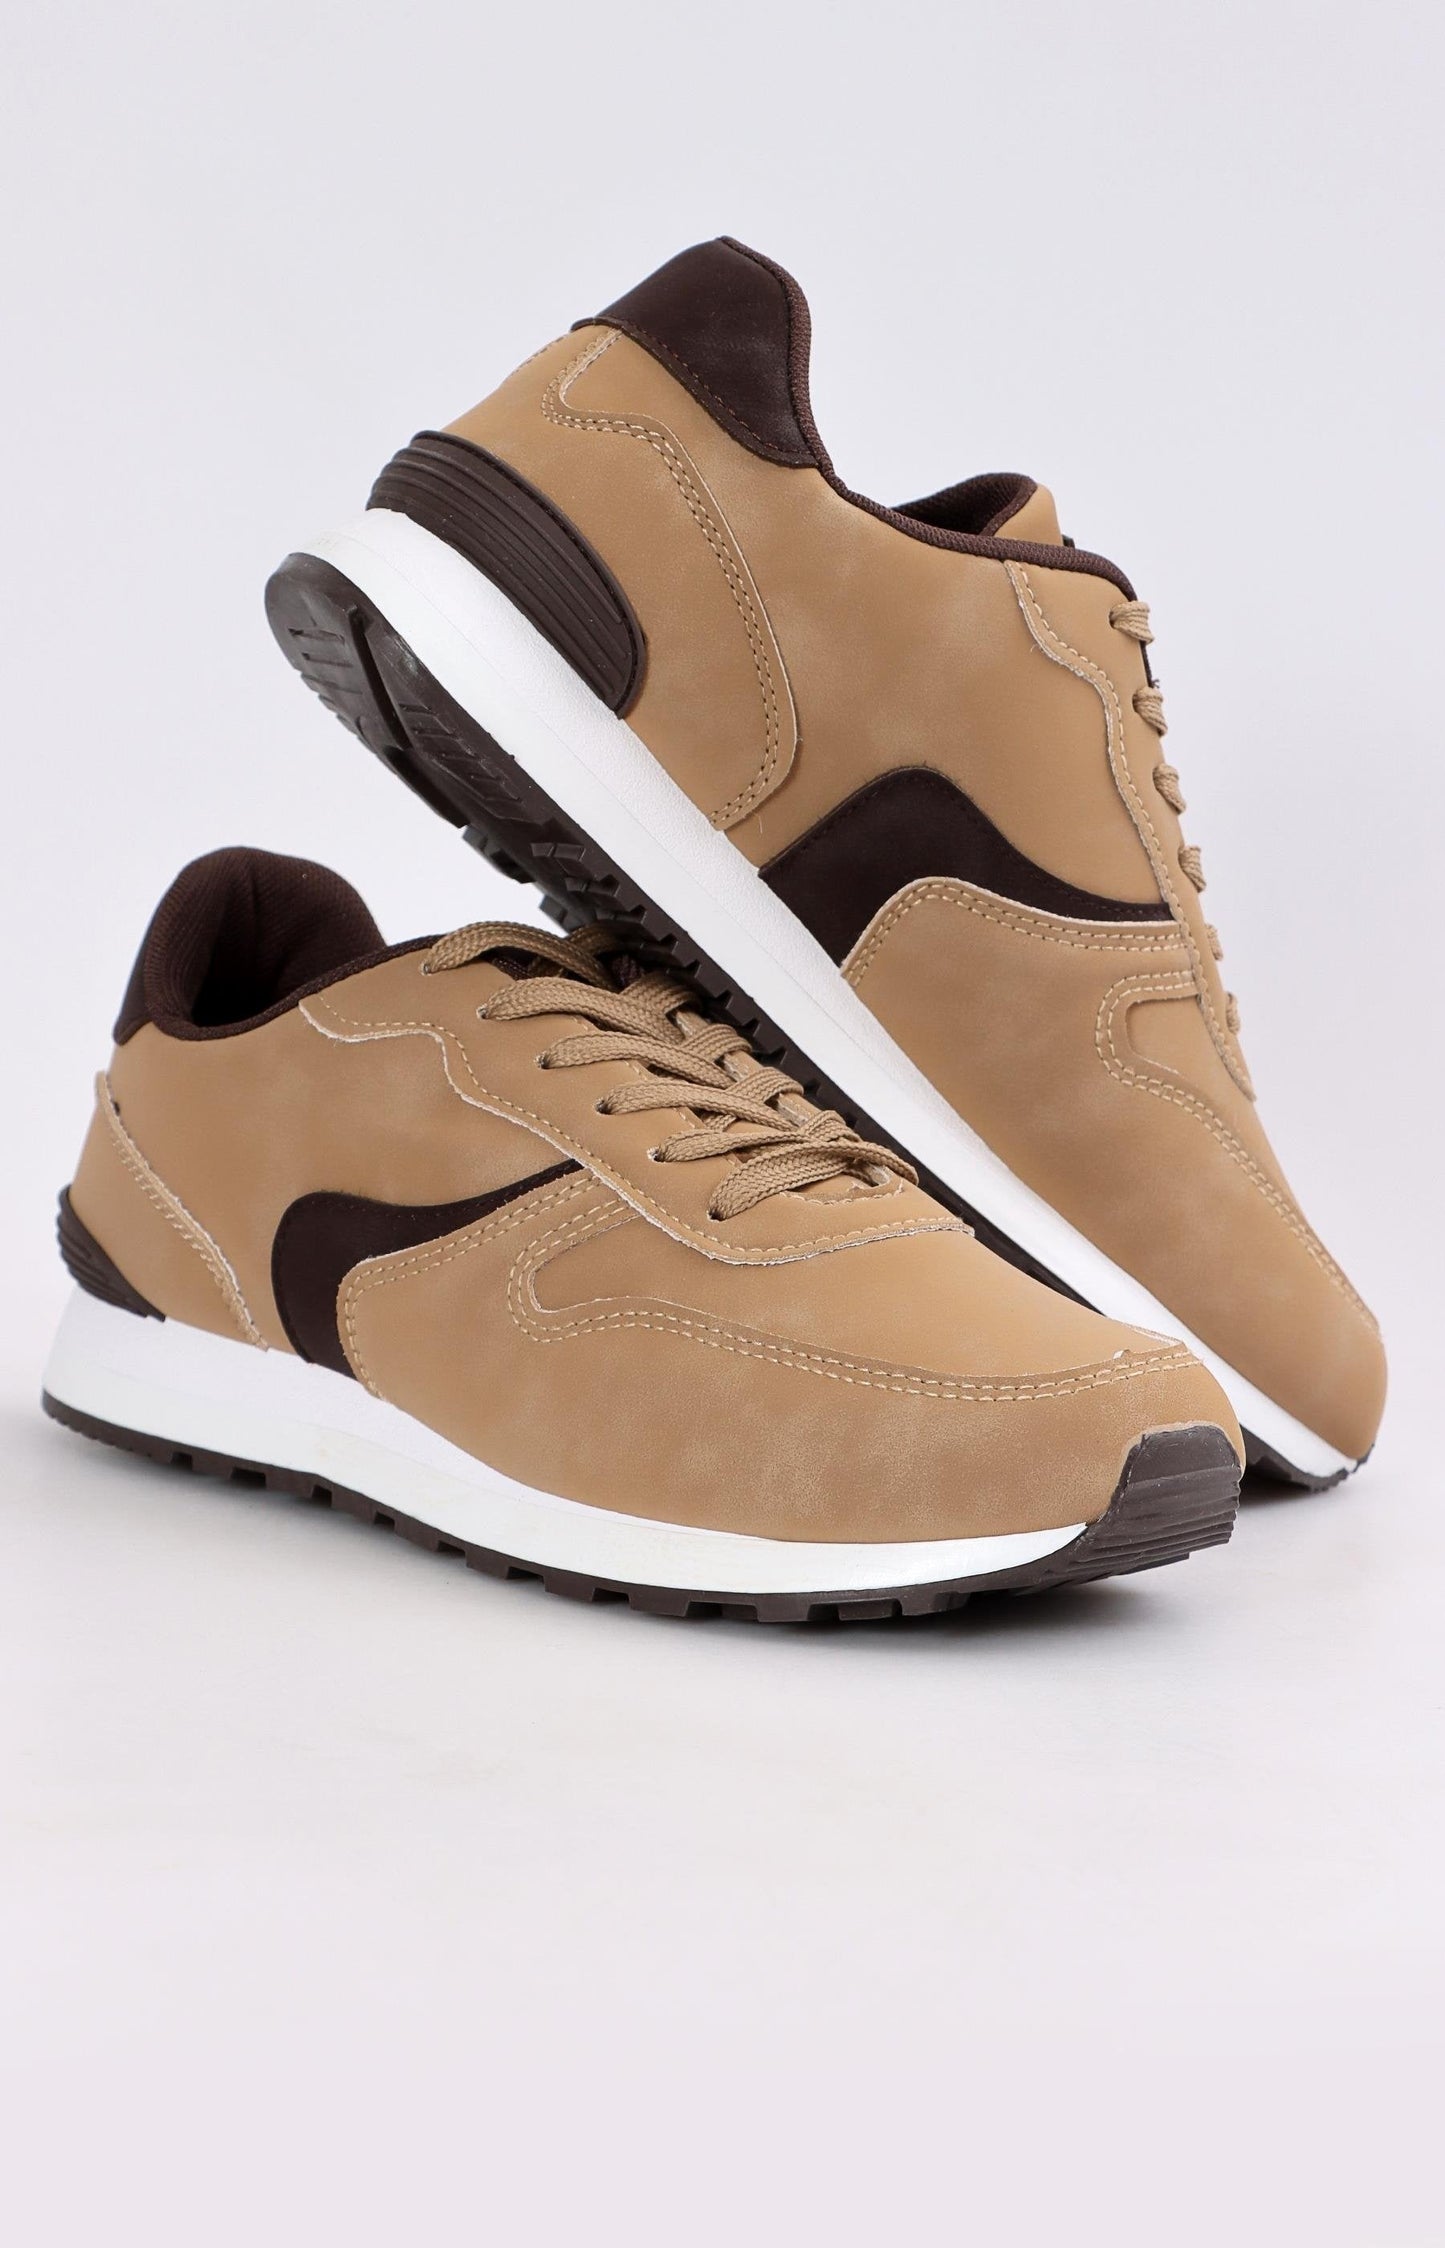 Mens Low Cut Casual Sneakers - Taupe